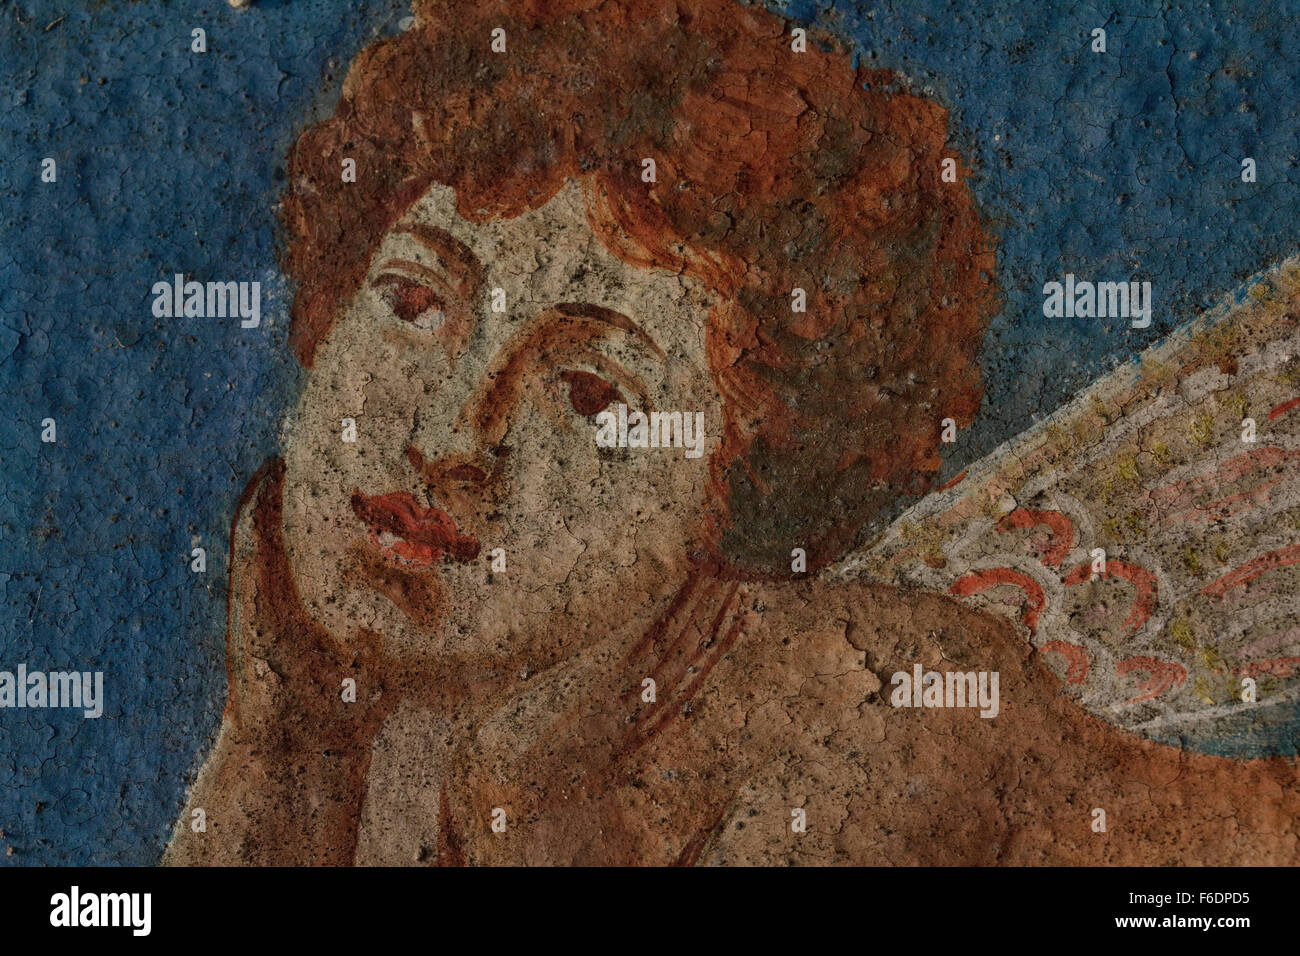 Cracked paint brush strokes of an angel's portrait, from wallpainting entitled 'The spring' by M. Papamalis. Kontias, Lemnos, GR Stock Photo